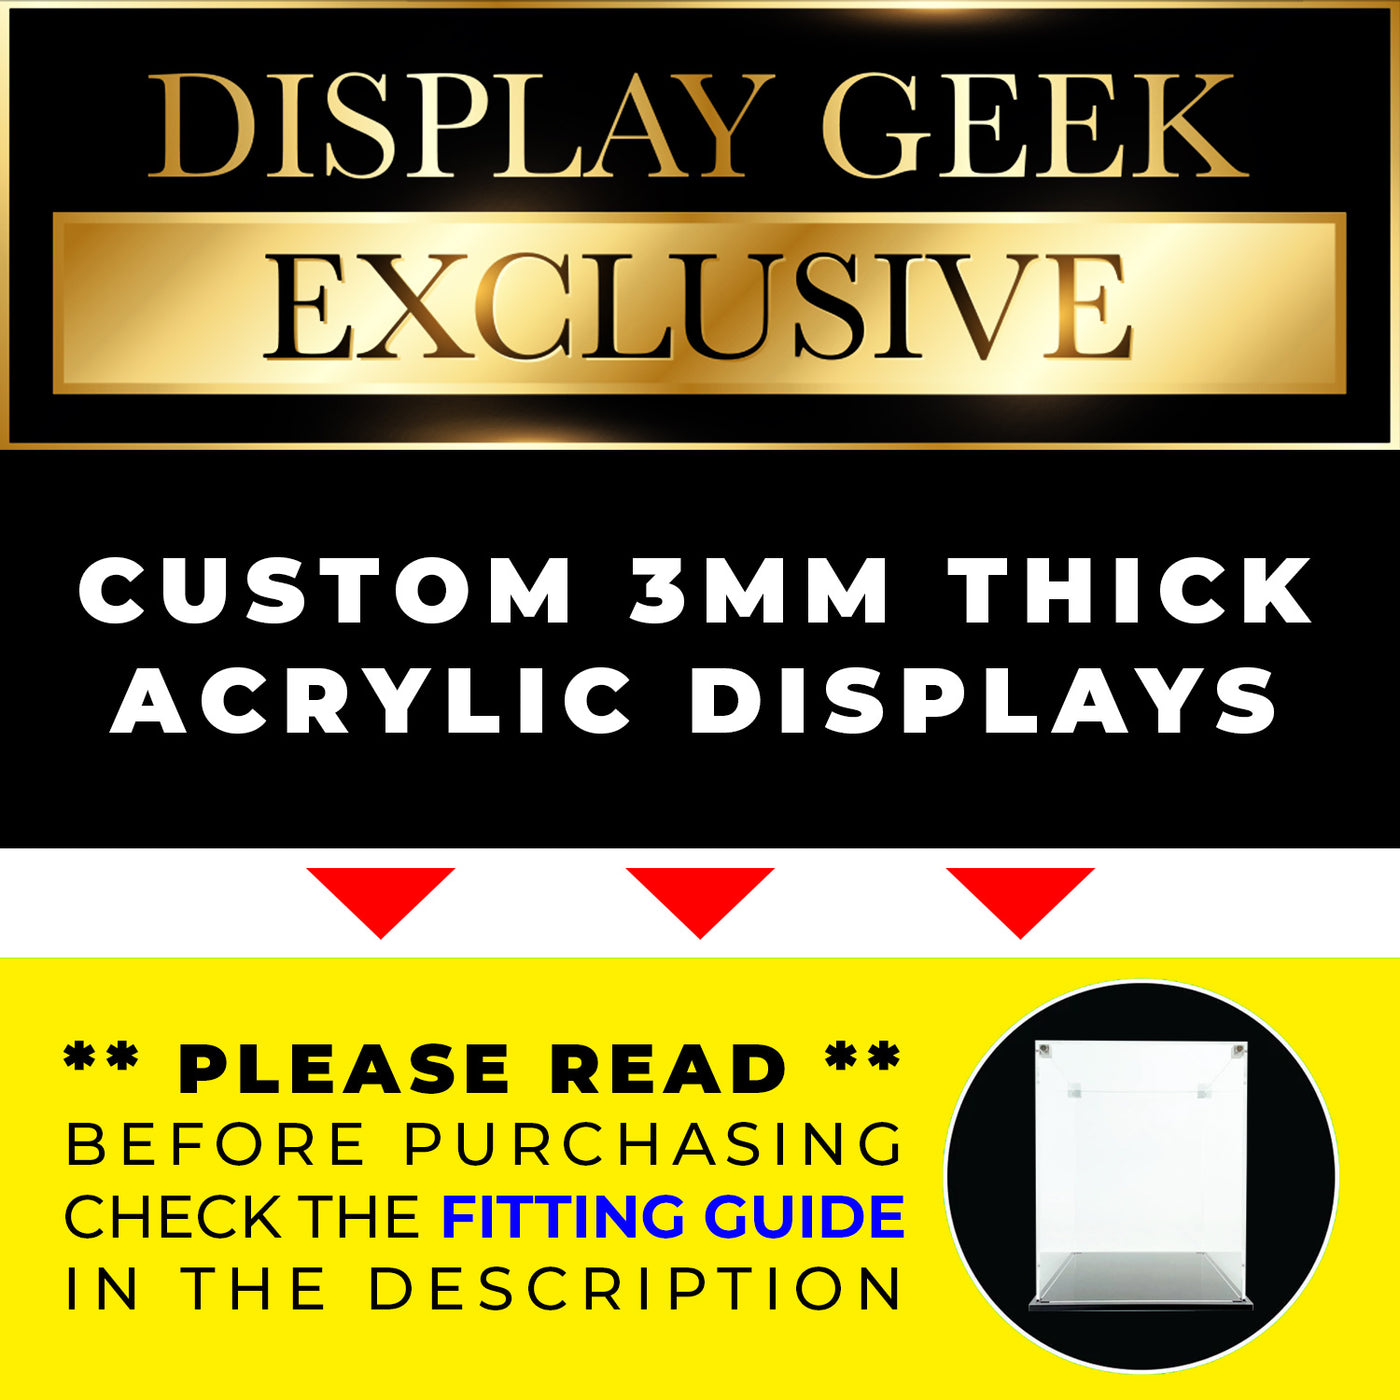 12.875h x 17w x 8.25d Funko Pop 10 inch The Child Grogu Custom Acrylic Display Case for Funko Pop Grails on The Protector Guide App by Display Geek